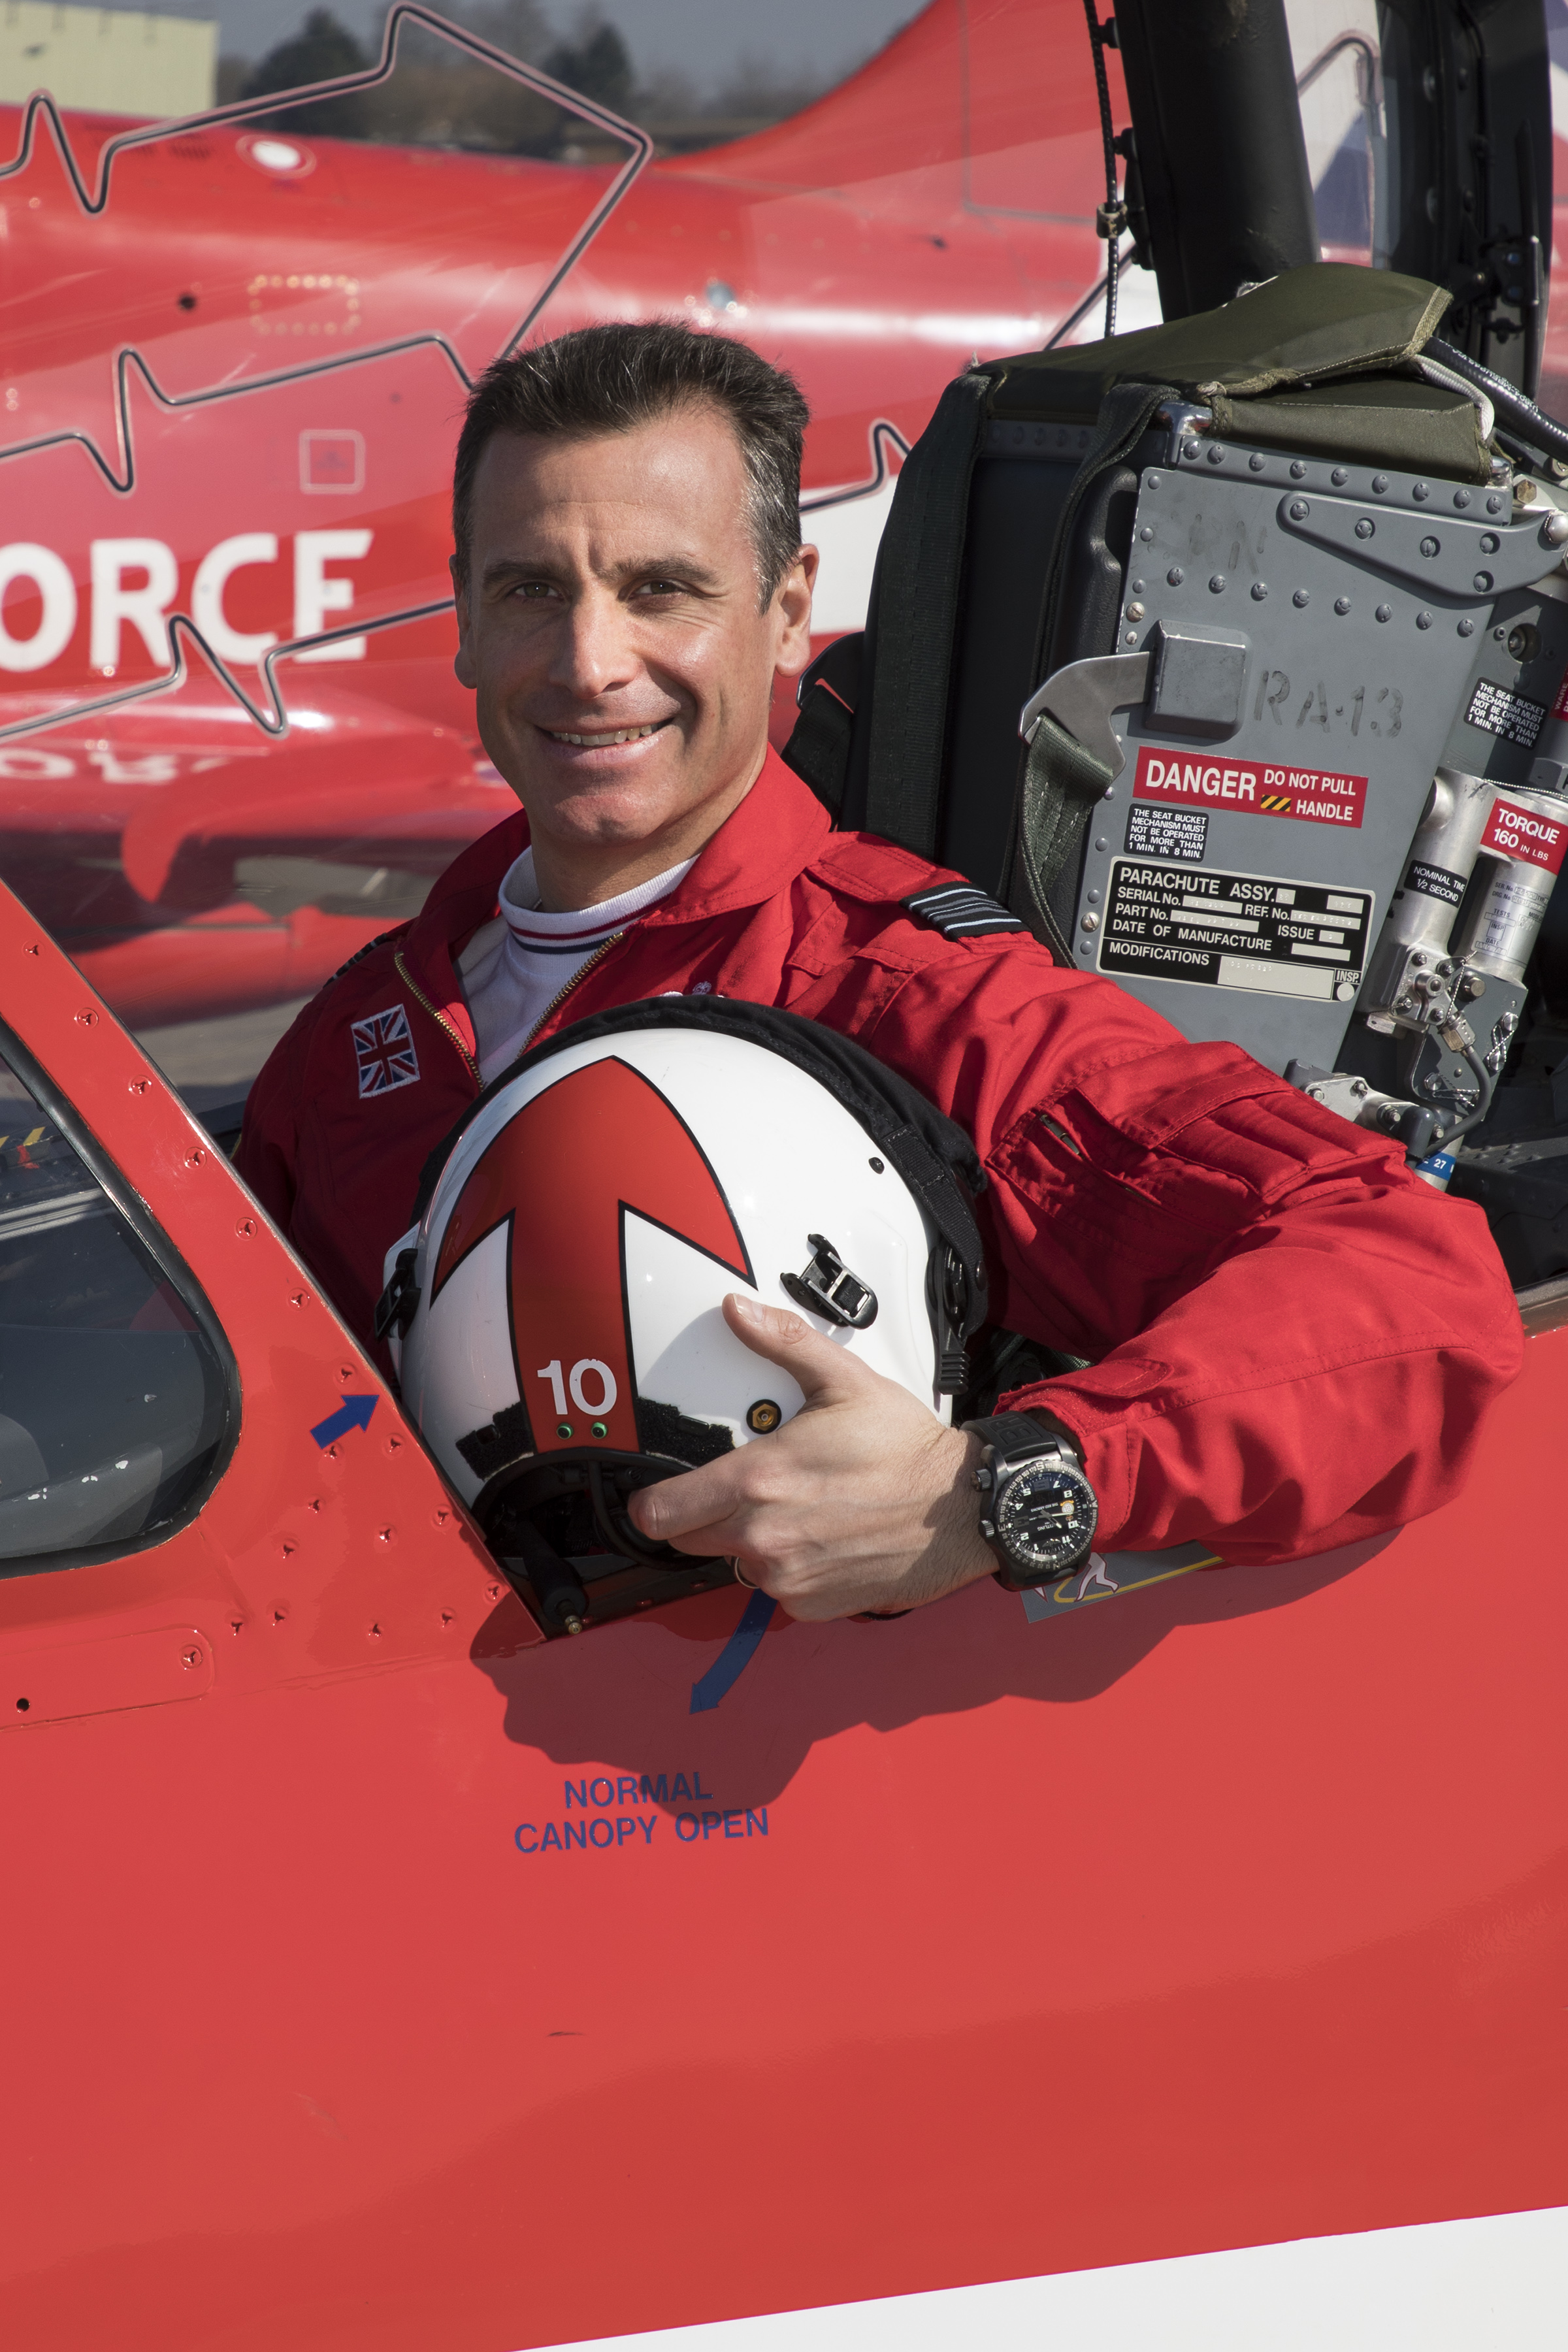 Wg Cdr Adam Collins joined the Red Arrows in 2018 as Red 10 and a Squadron Leader